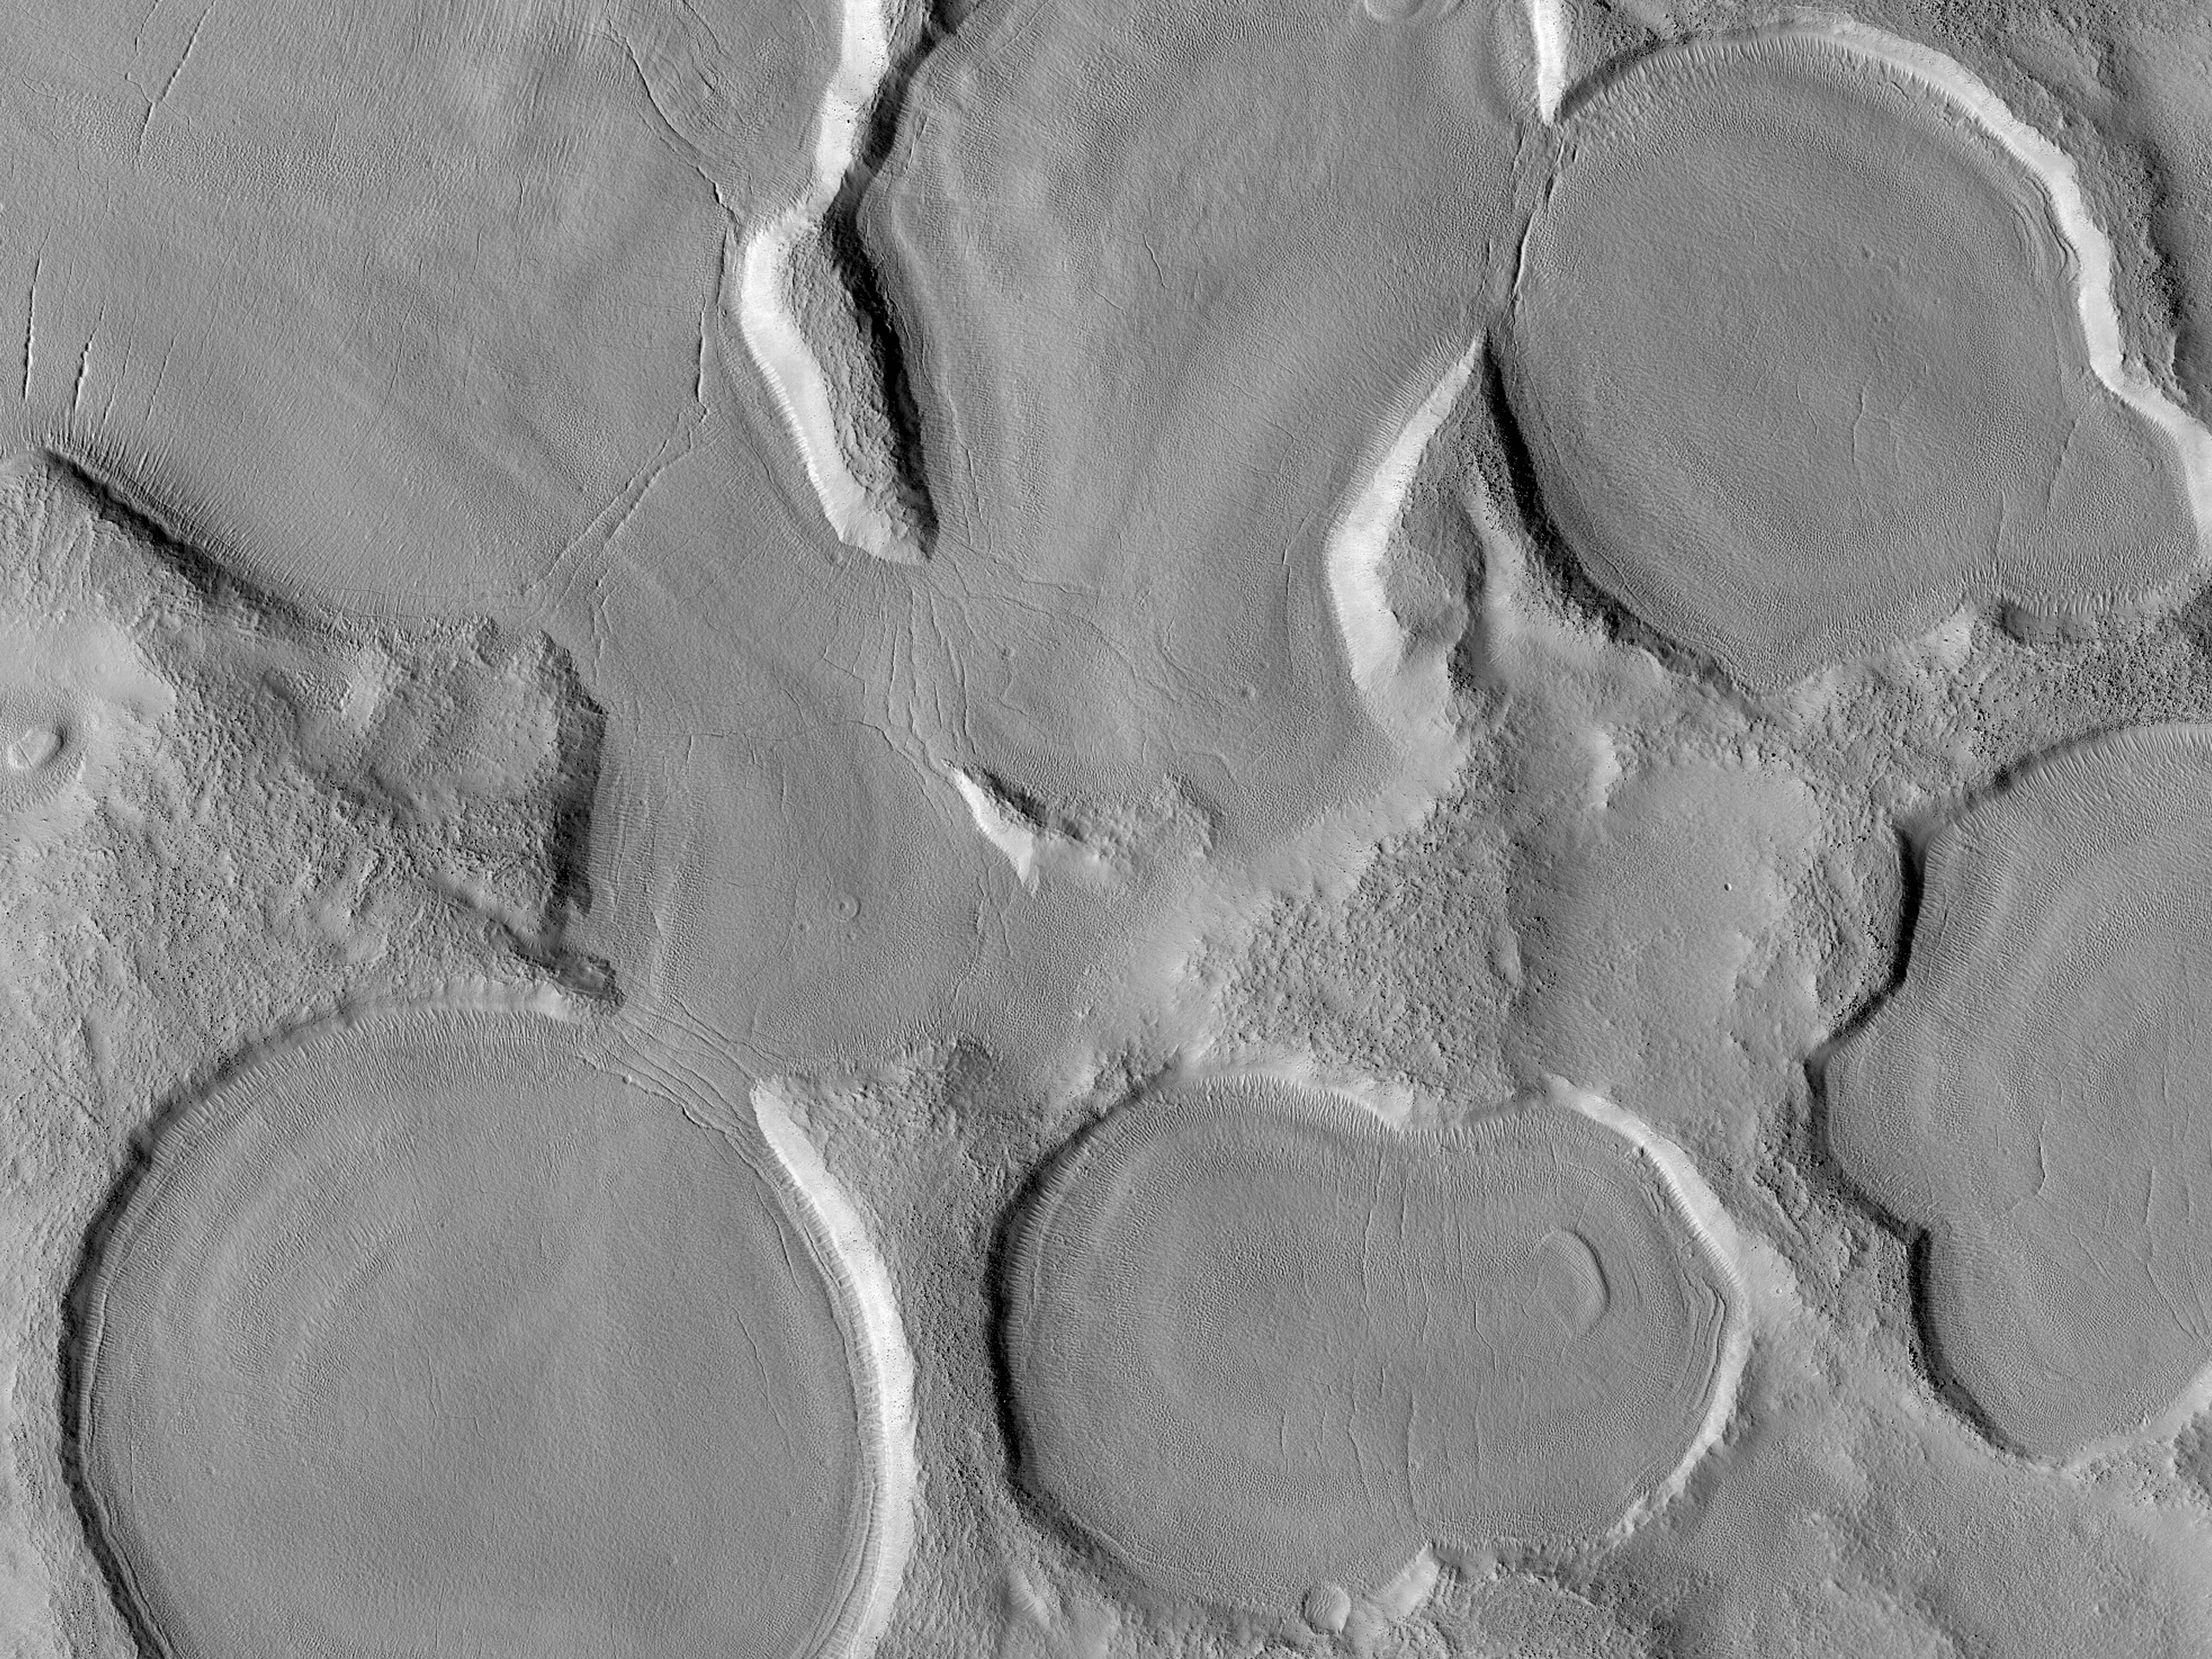 A Puddle of Craters